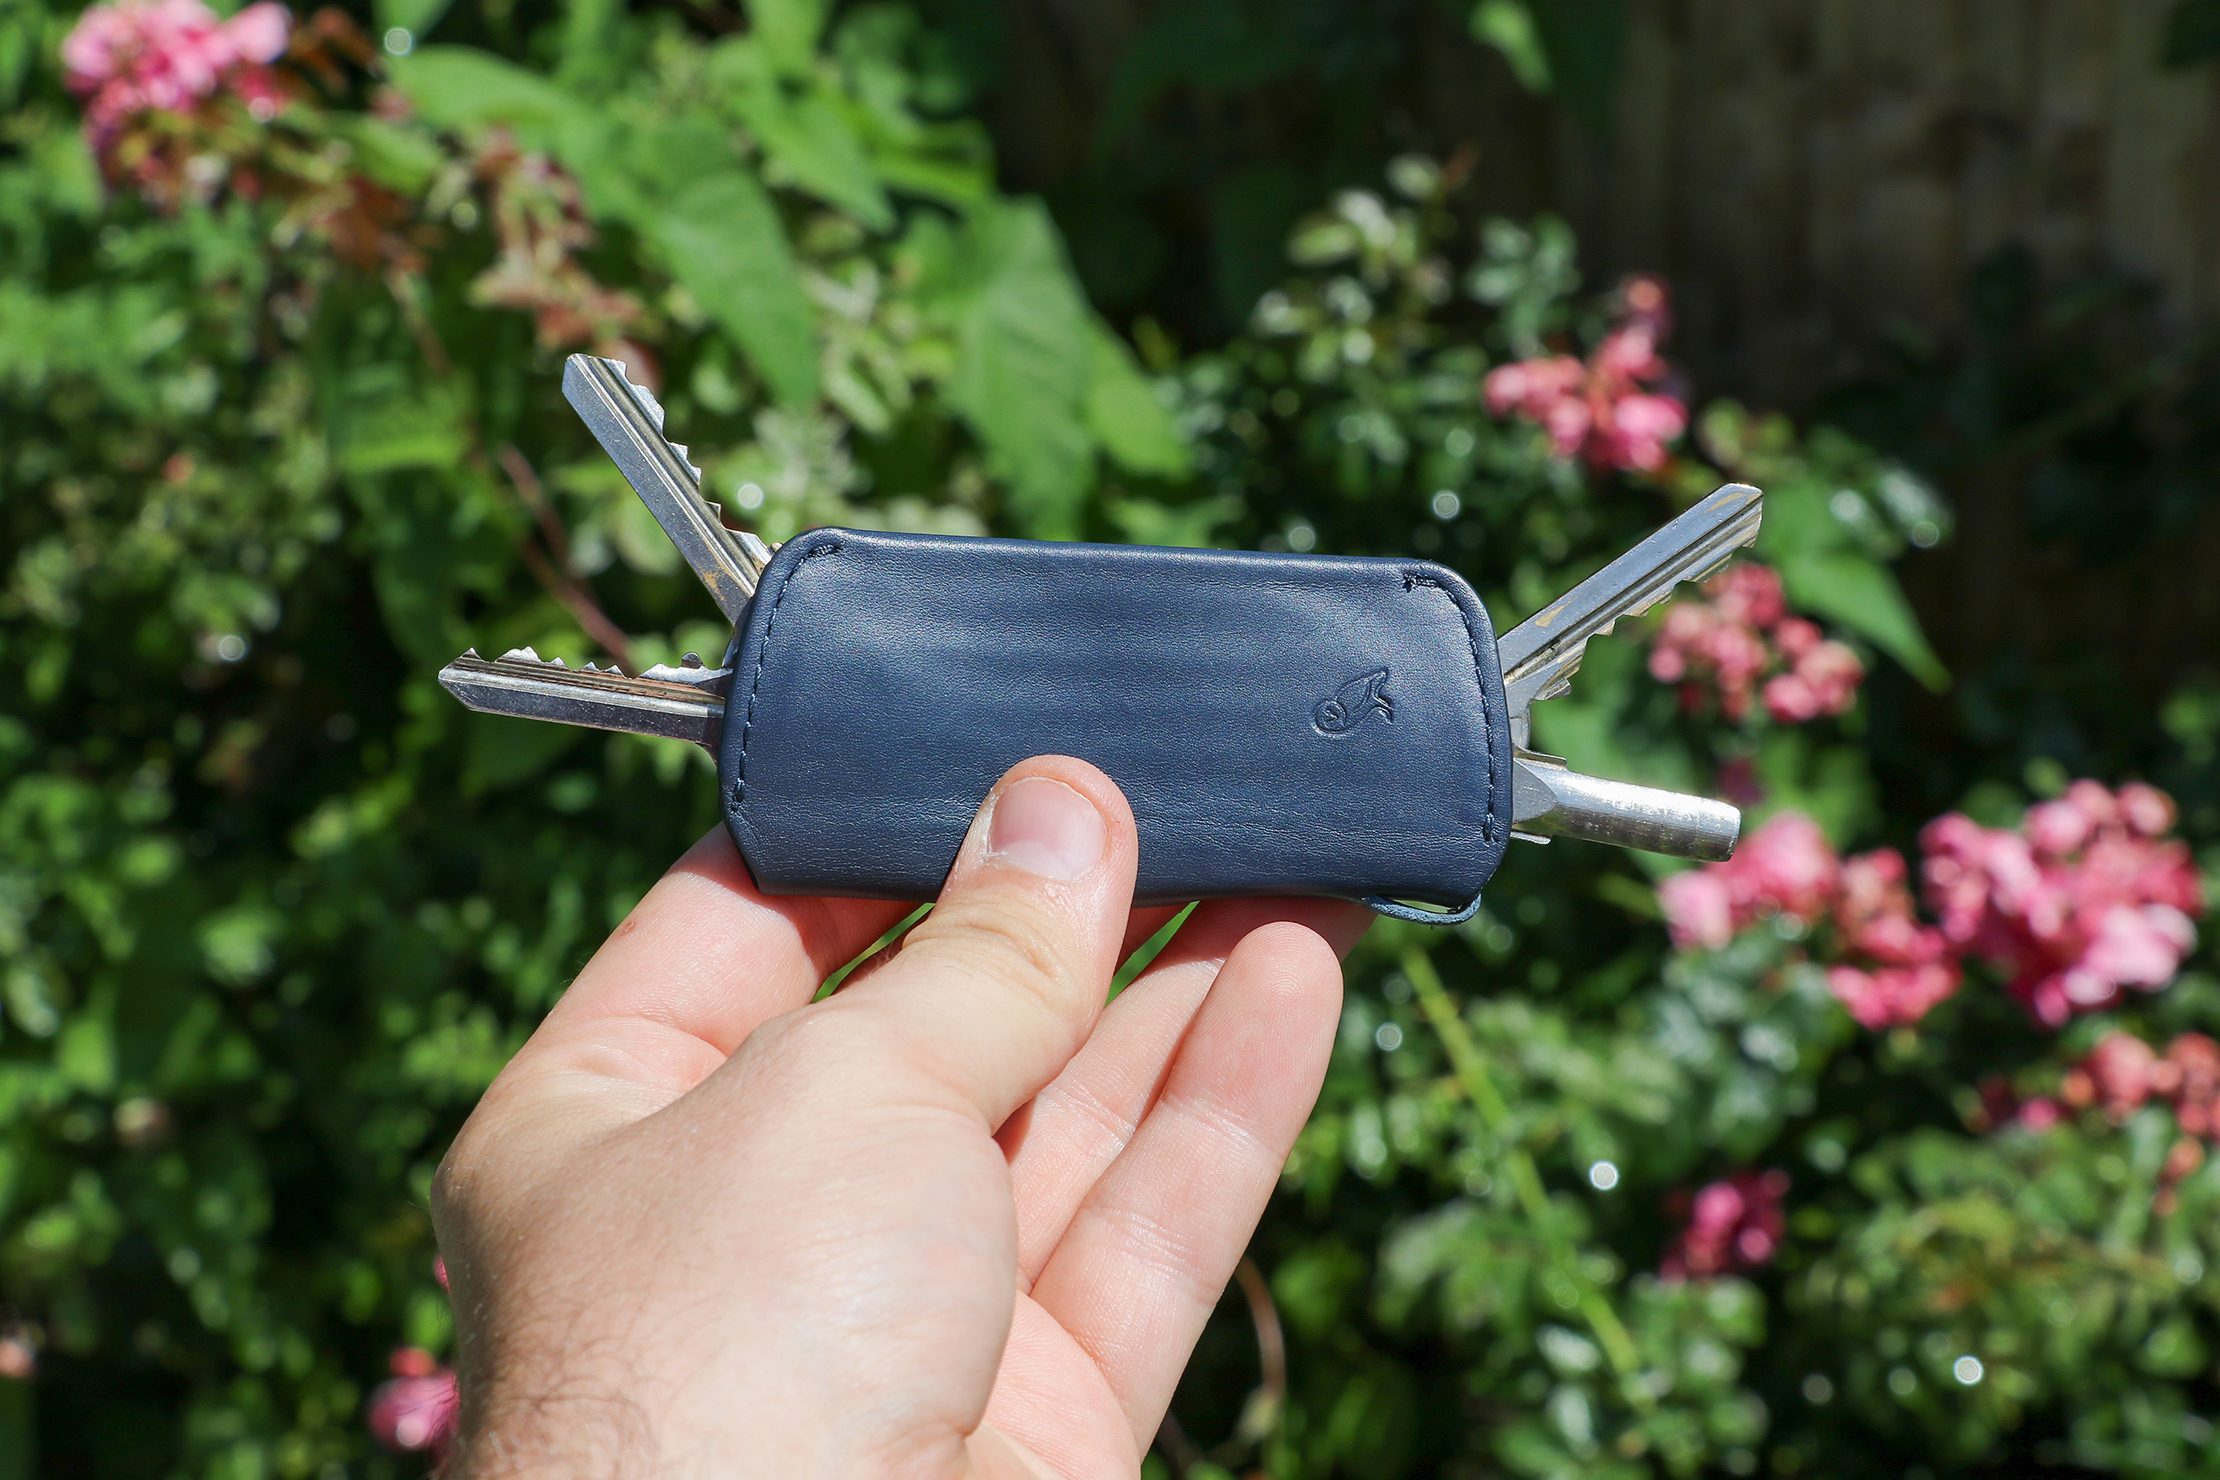 Bellroy Key Cover Plus In Essex England